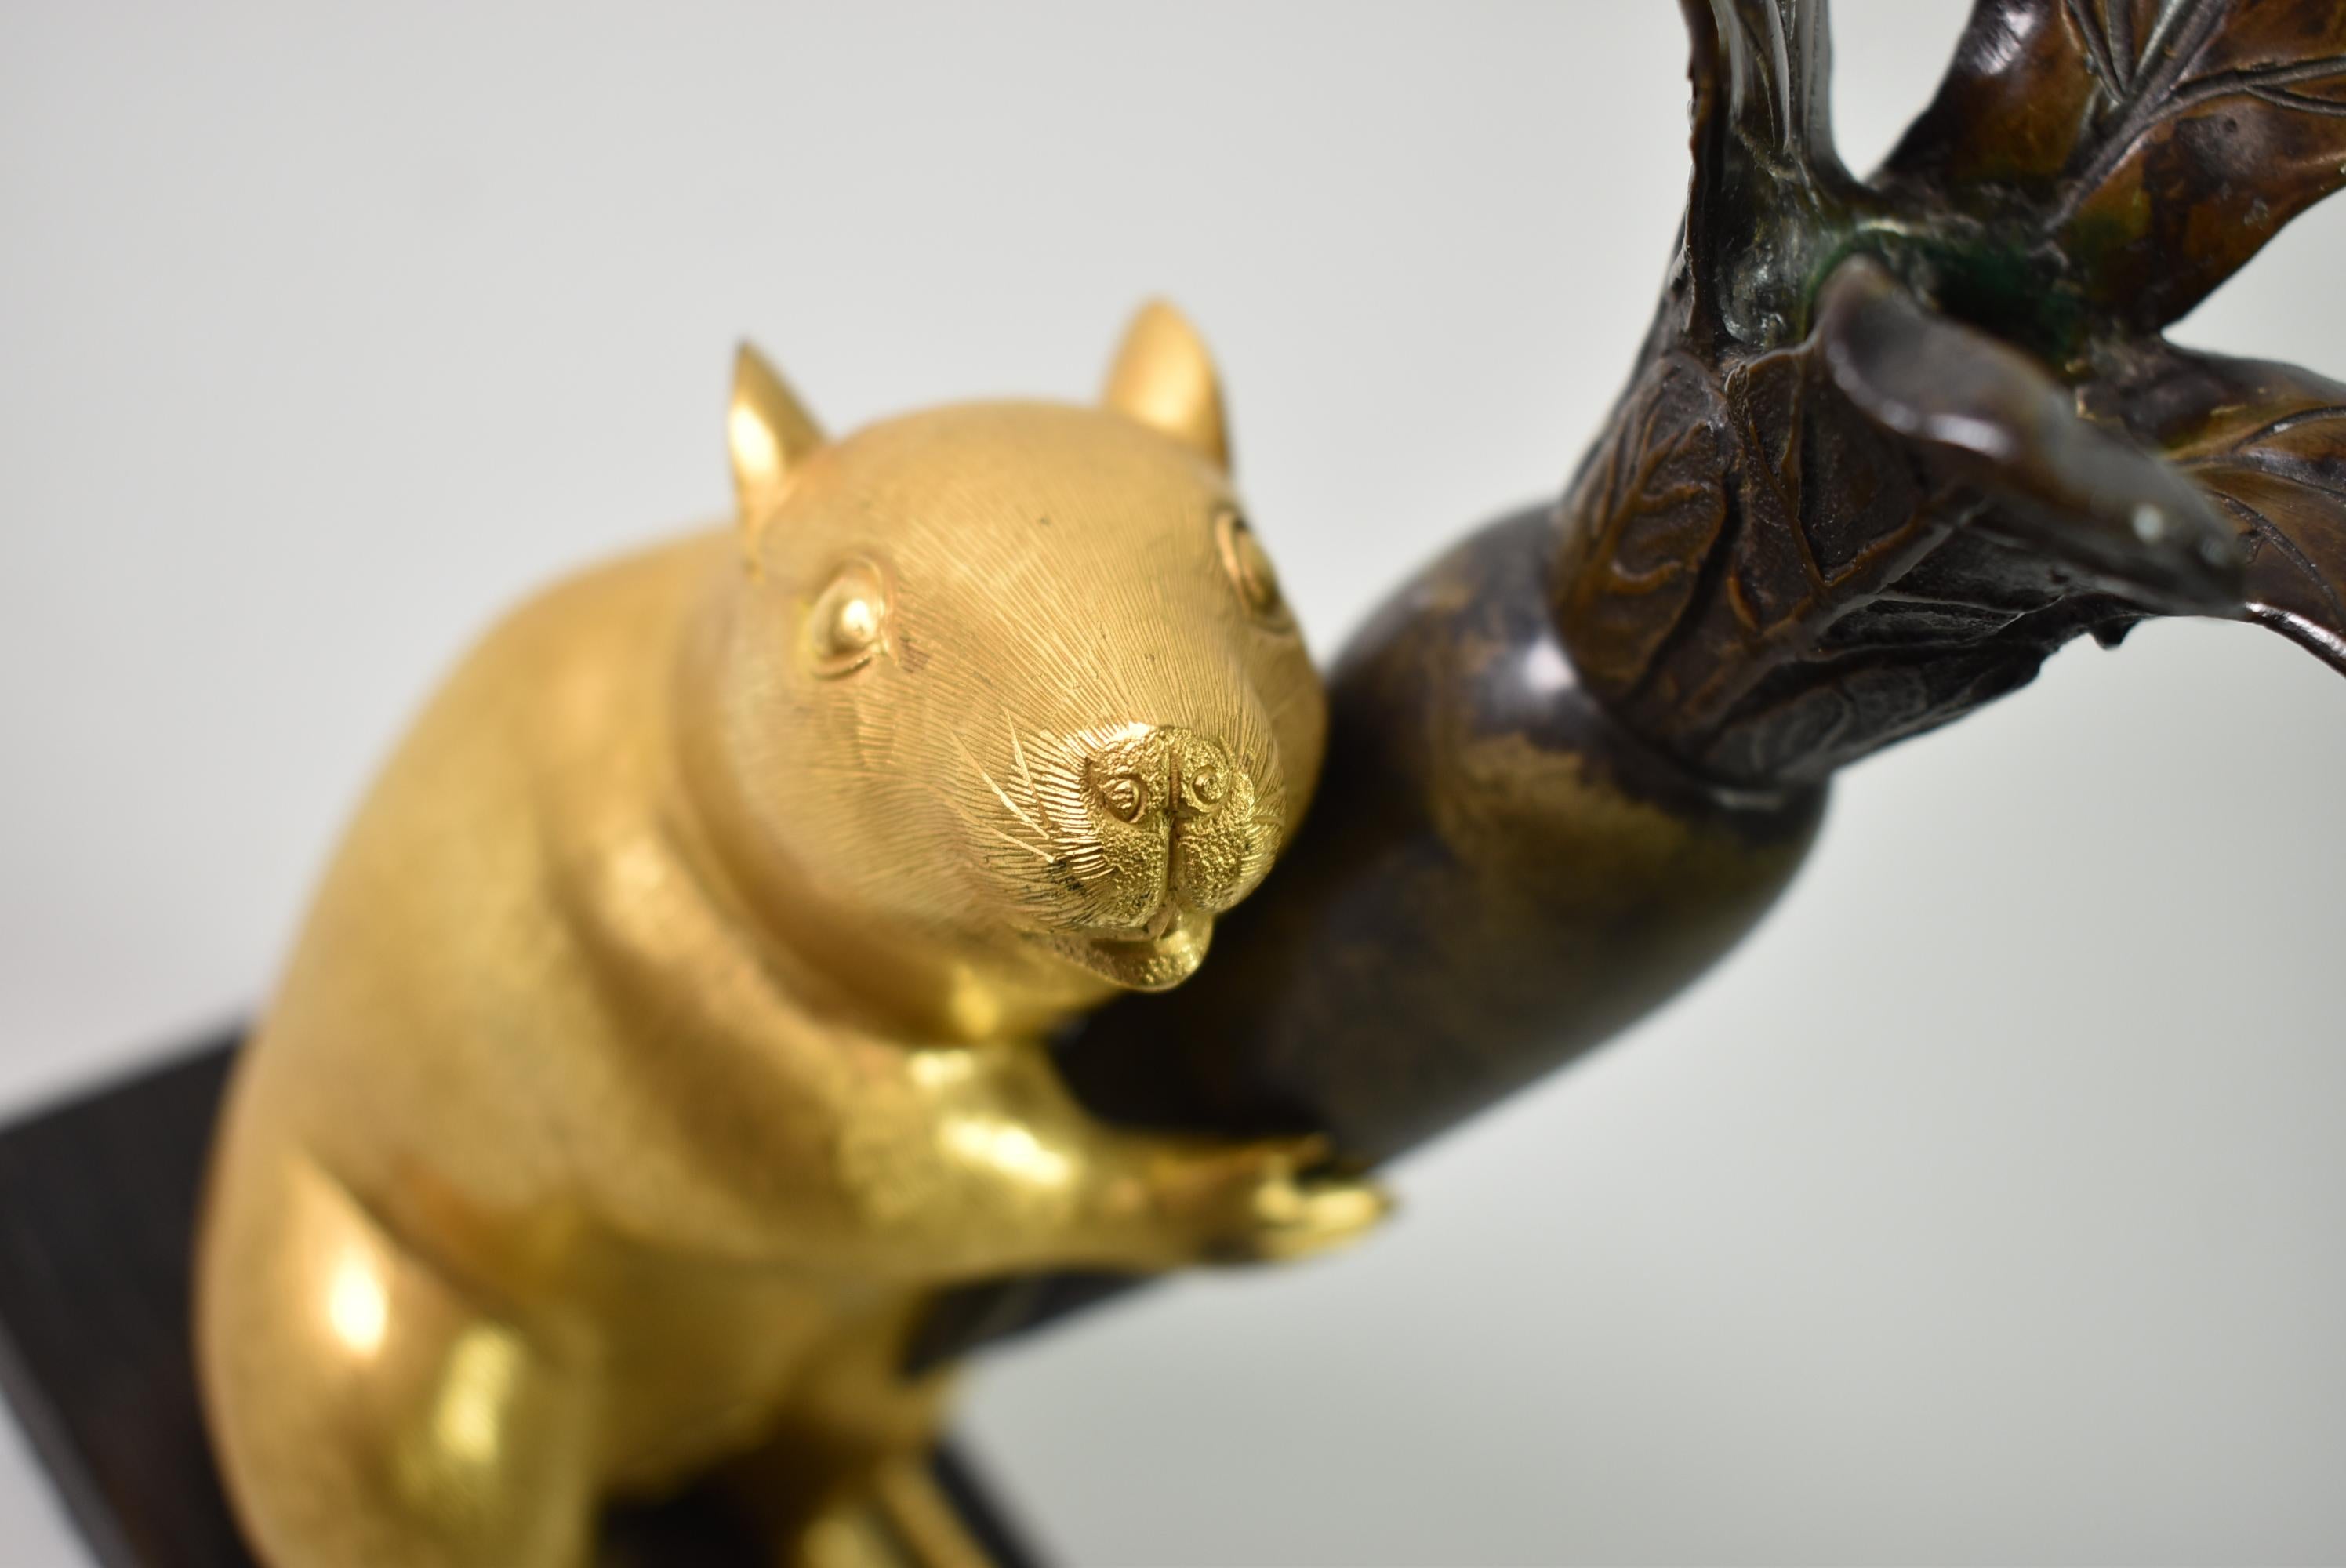 Japanese Meiji Bronze Rat Candlestick Holder from the Meiji Period (1868-1912). Charming bronze candlestick of a rat holding a Japanese turnip as the leaves of the vegetable form the candlestick holder. Rats are a symbol of wealth and fertility in